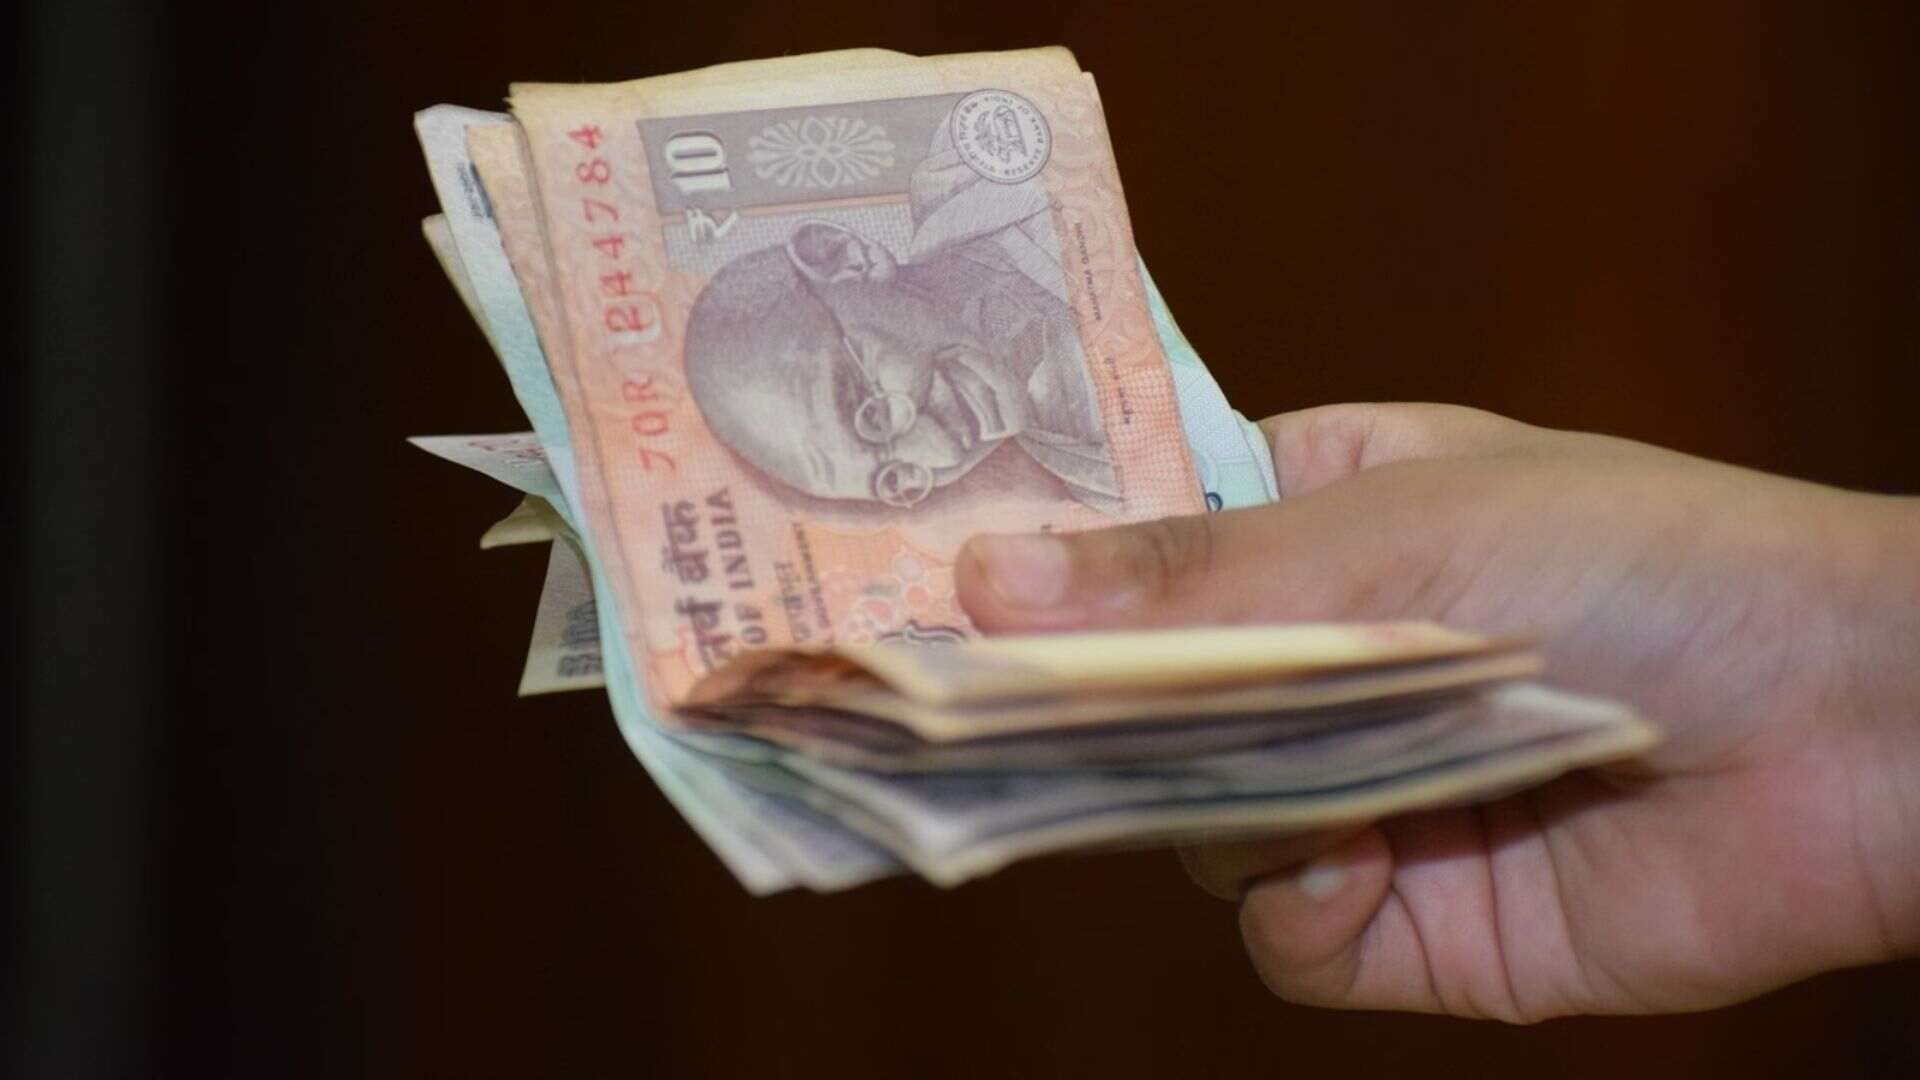 Thief Leaves Rs. 20 Note To Owners After Finding Nothing To Steal At Telangana Hotel